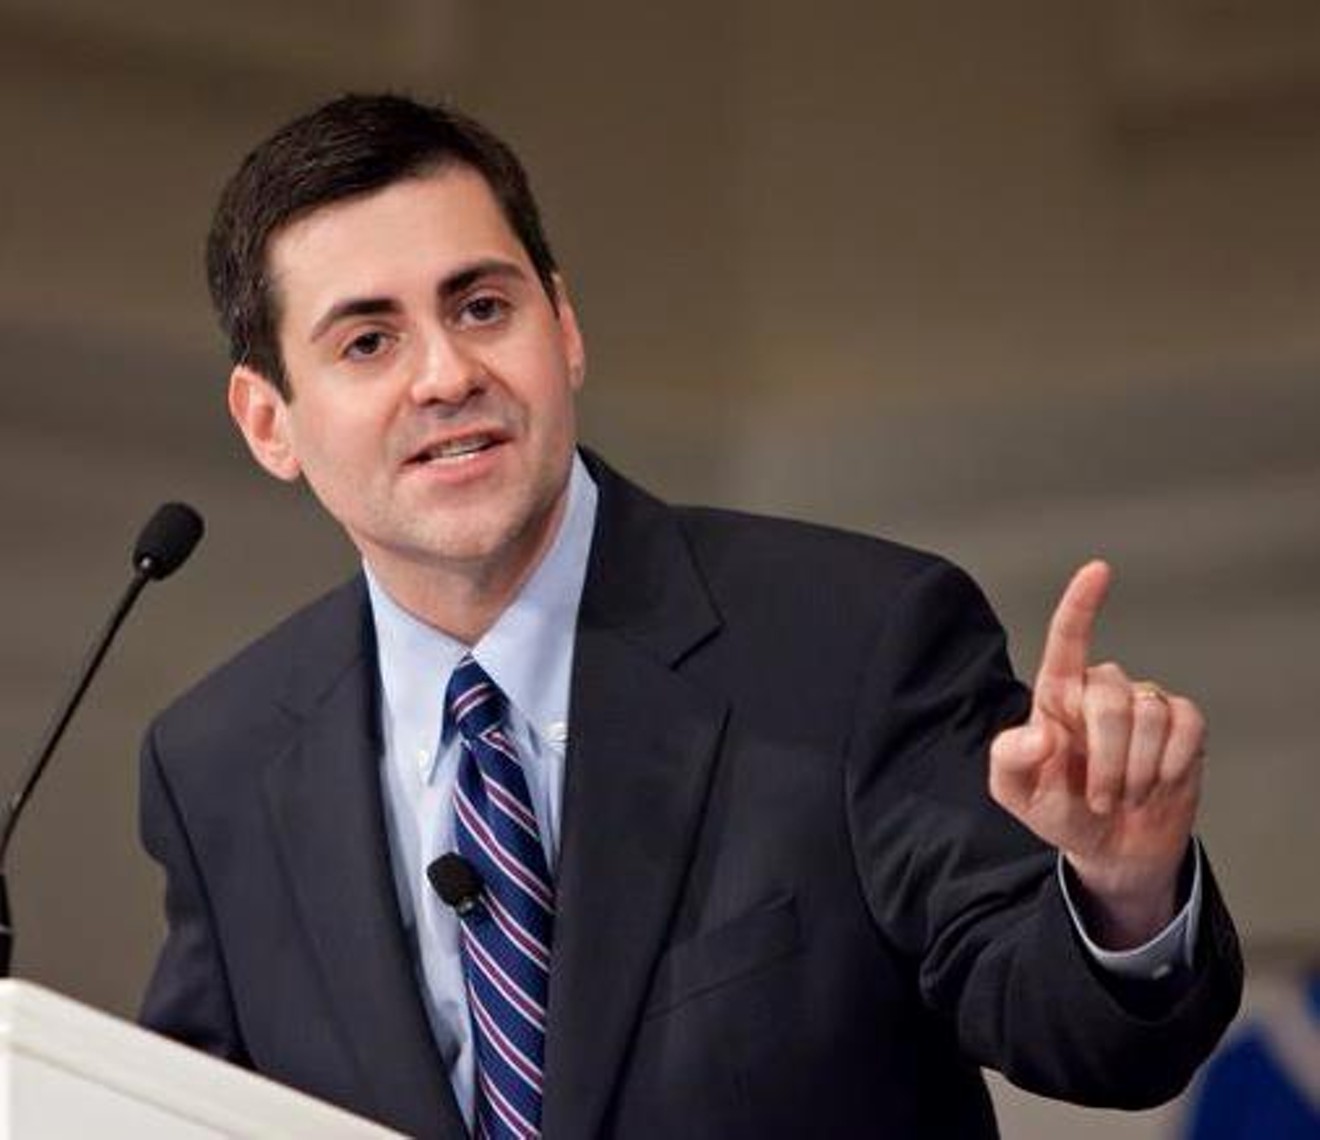 Russell Moore preaching at Southern Baptist Theological Seminary in 2011.